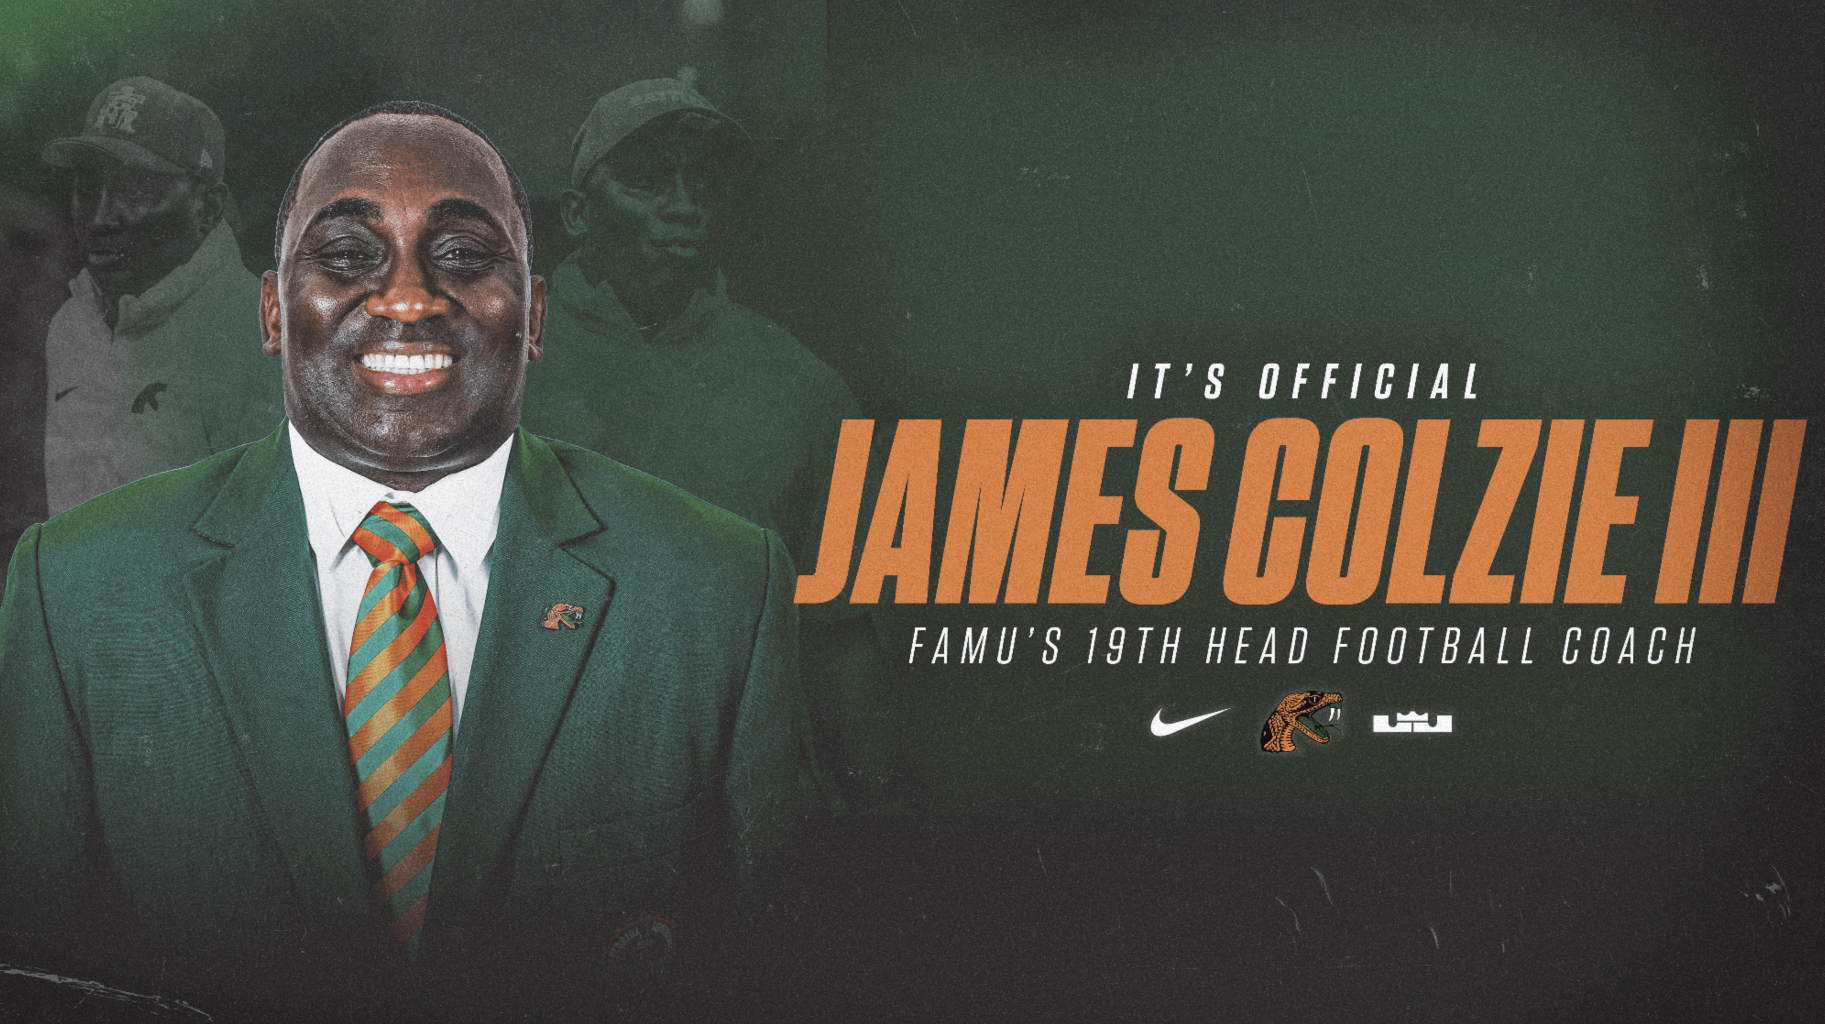 Colzie named Rattlers 19th Head Coach